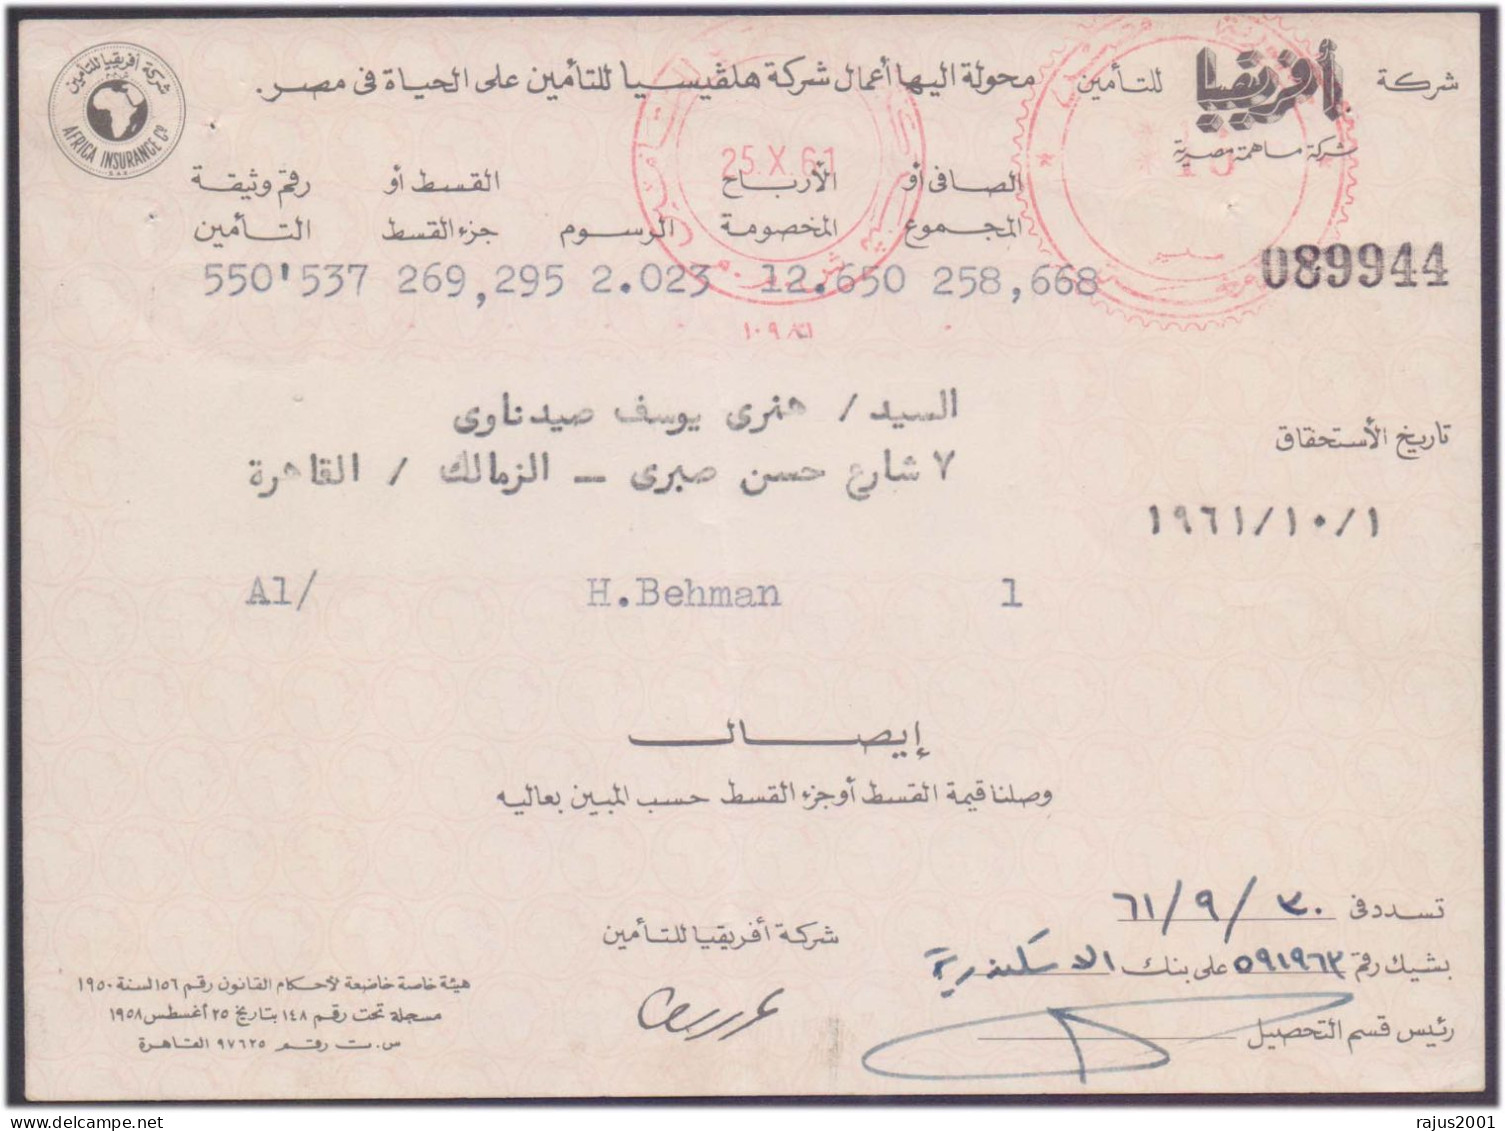 Business Of Helqisia Life Insurance Company In Egypt, RED METER FRANK, EMA, Receipt Old Document Egypt 1960 - Covers & Documents